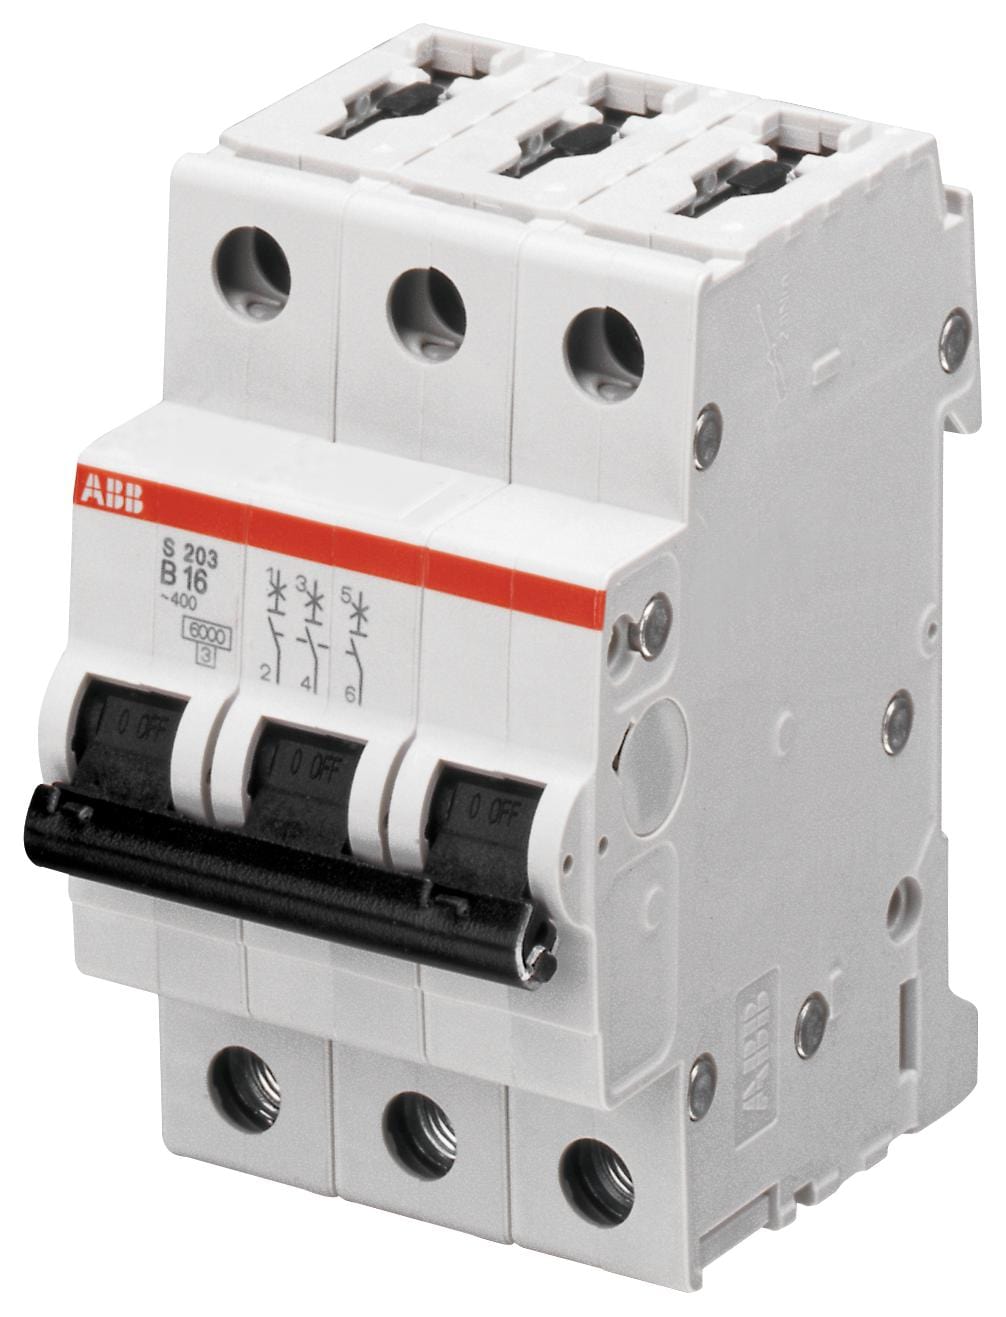 ABB Thermal Magnetic S203M-D6 CIRCUIT BREAKER, THERMAL MAG, 3 POLE ABB 2501402 S203M-D6